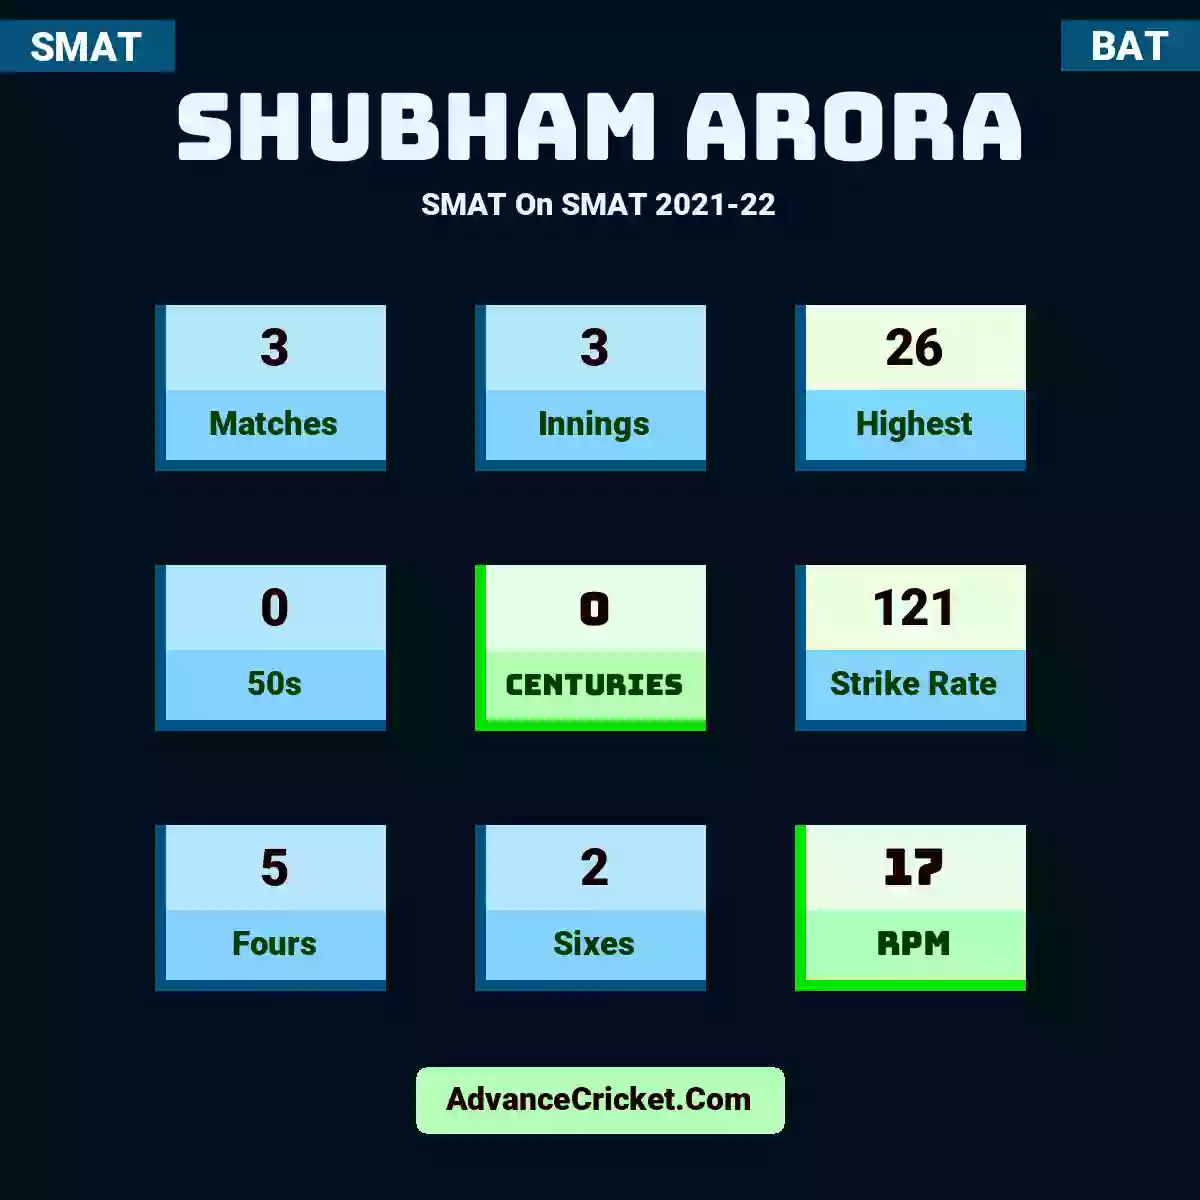 Shubham Arora SMAT  On SMAT 2021-22, Shubham Arora played 3 matches, scored 26 runs as highest, 0 half-centuries, and 0 centuries, with a strike rate of 121. S.Arora hit 5 fours and 2 sixes, with an RPM of 17.